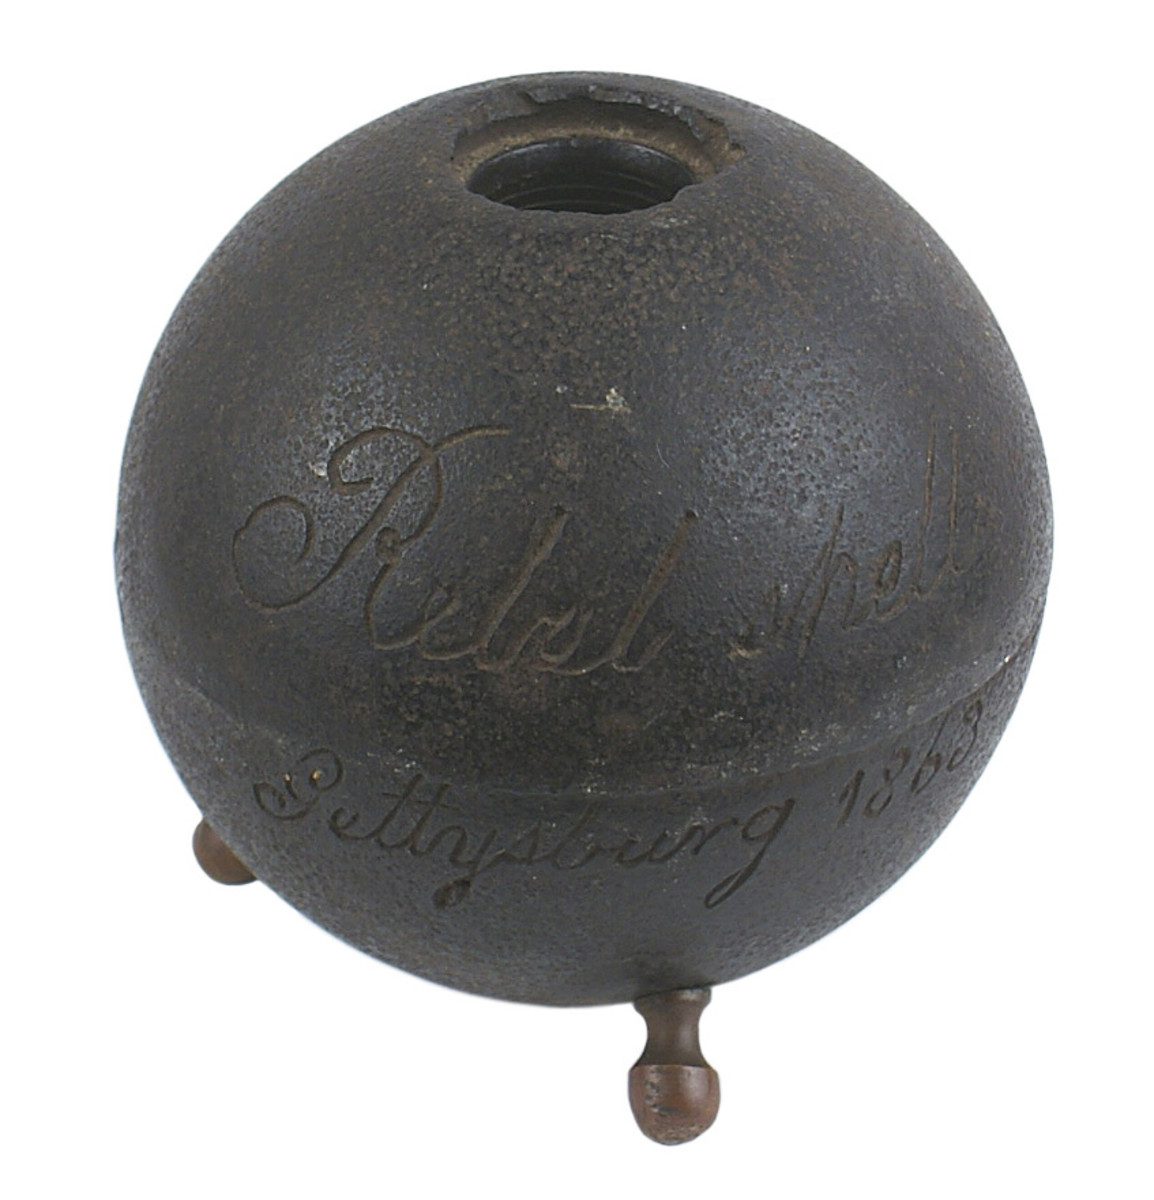 Confederate cannonball from the Battle of Gettysburg (1863), mounted on three brass leg finials ($5,850).